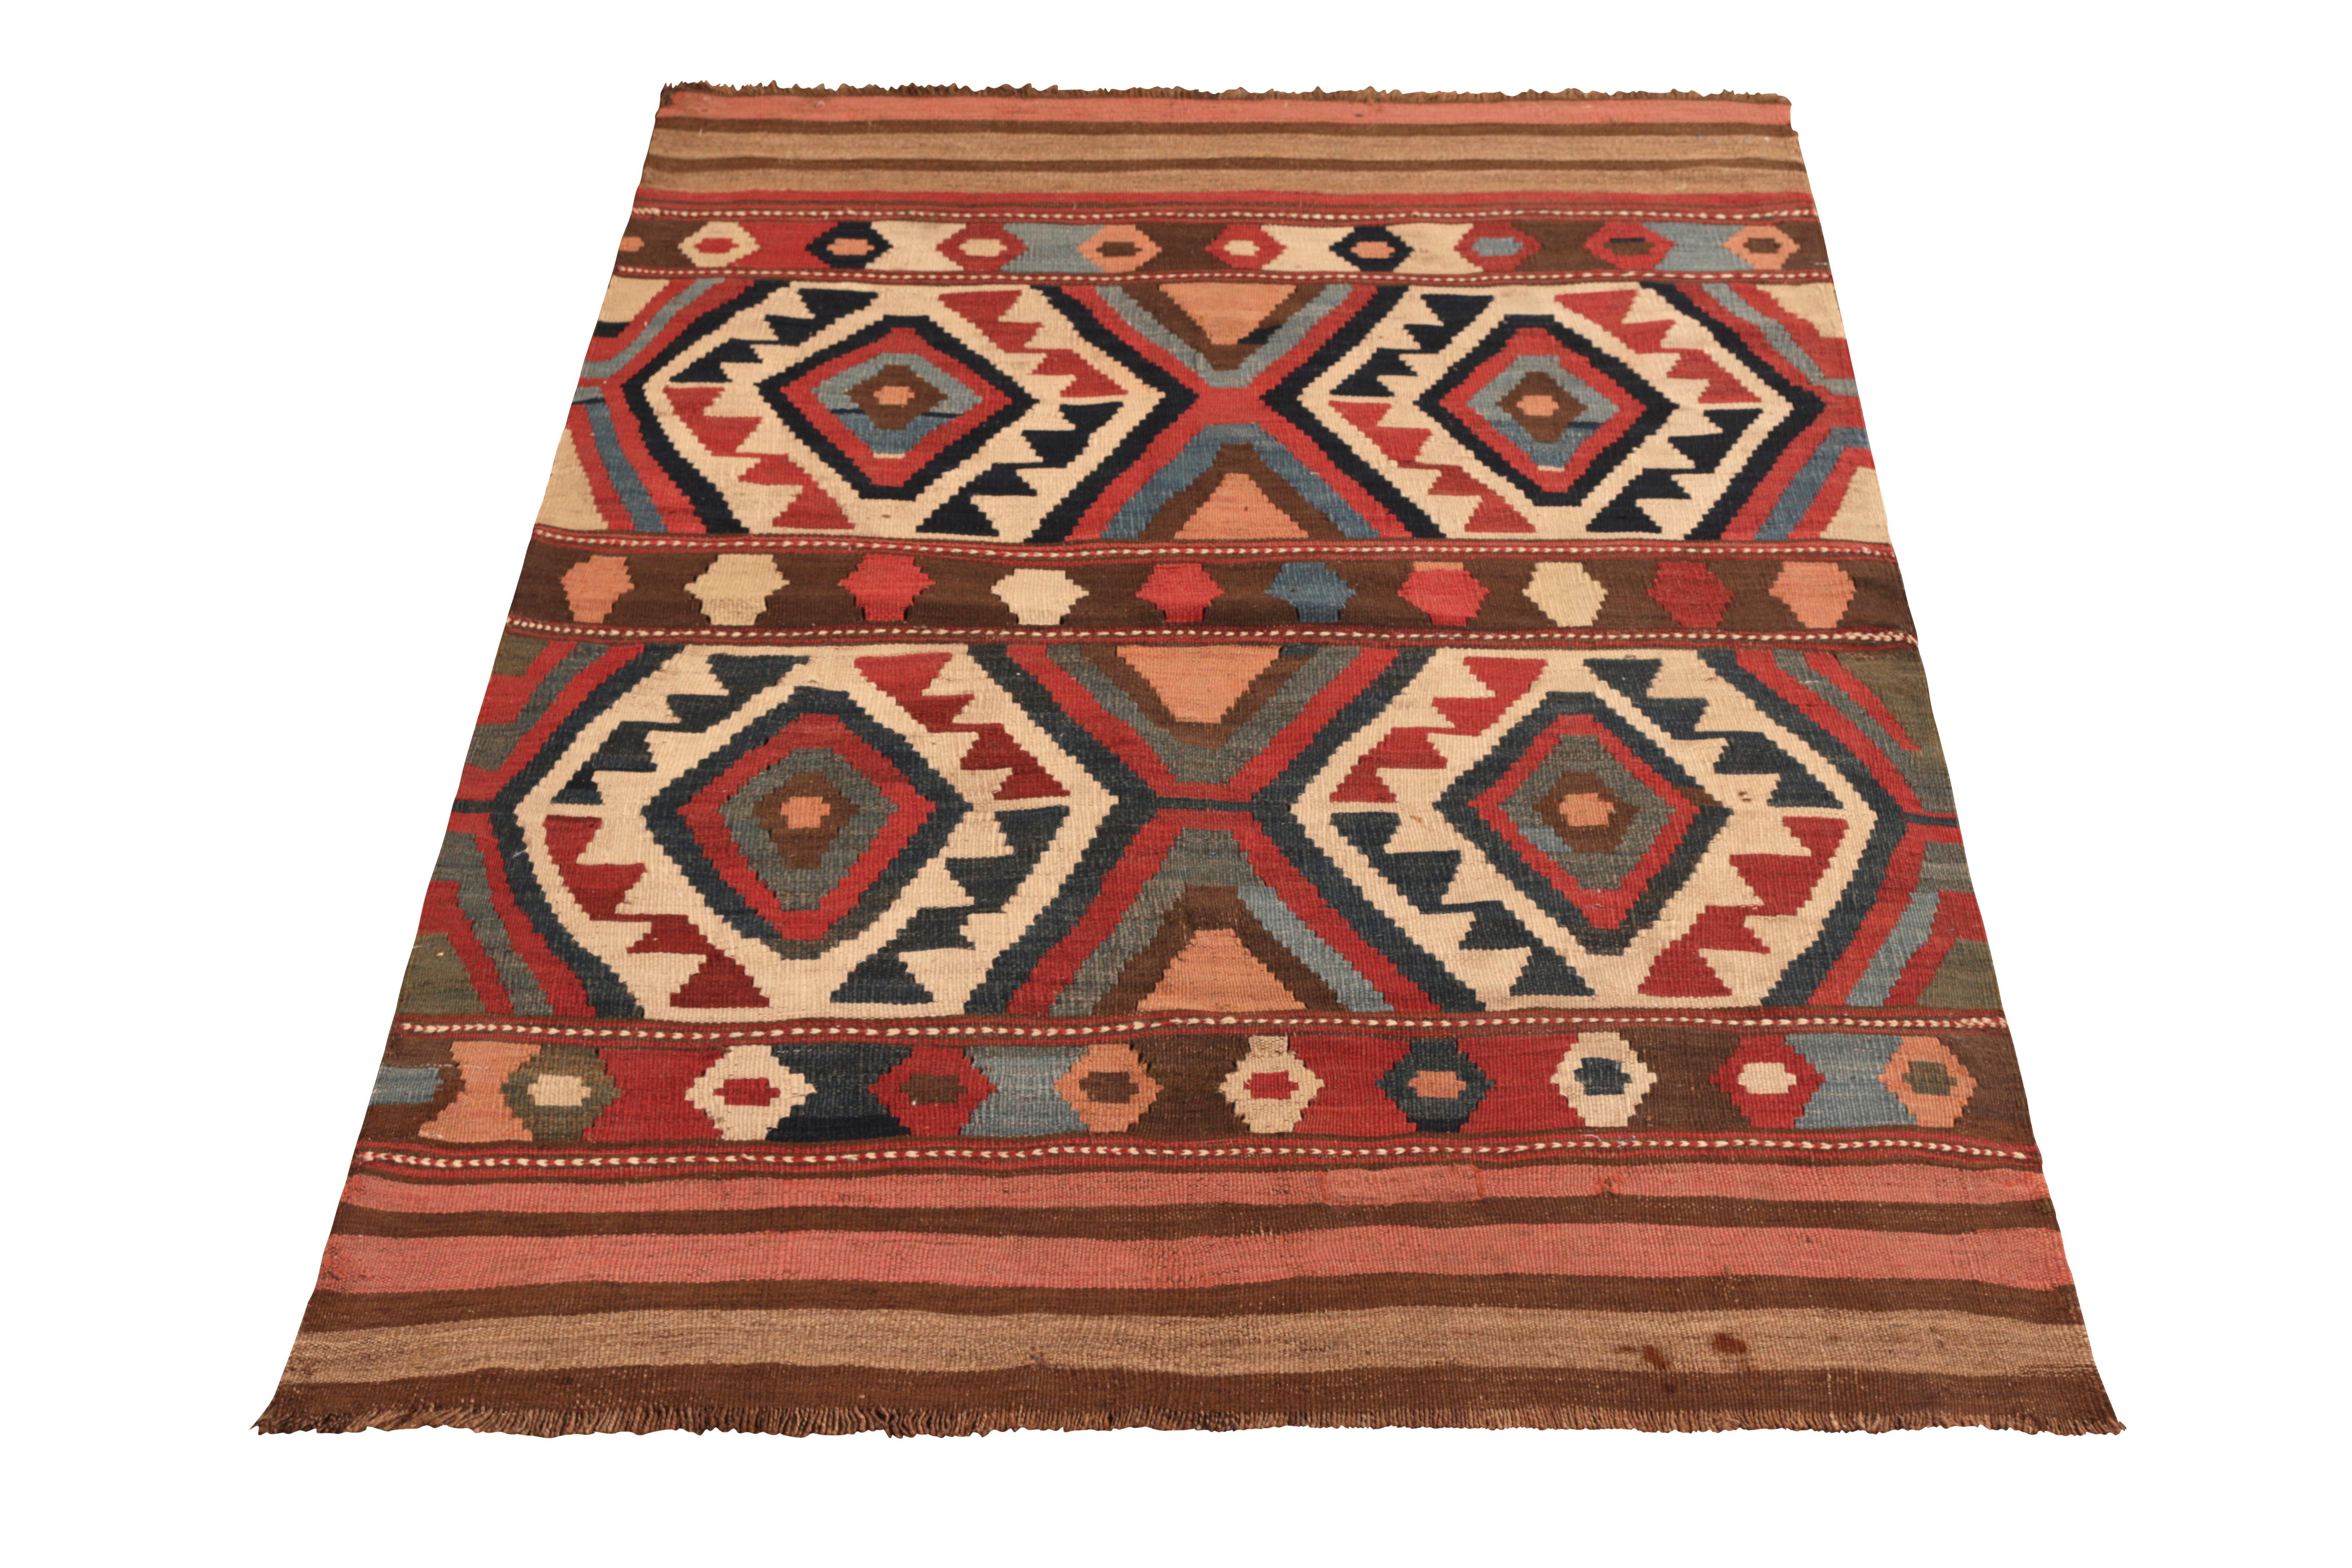 Hand woven in wool originating from Russia circa 1910-1920, this antique rug connotes a transitional Shahsavan Kilim with an arresting tribal pattern; hues of clay red, blue, black and off-white lending a sense of movement to the prevailing